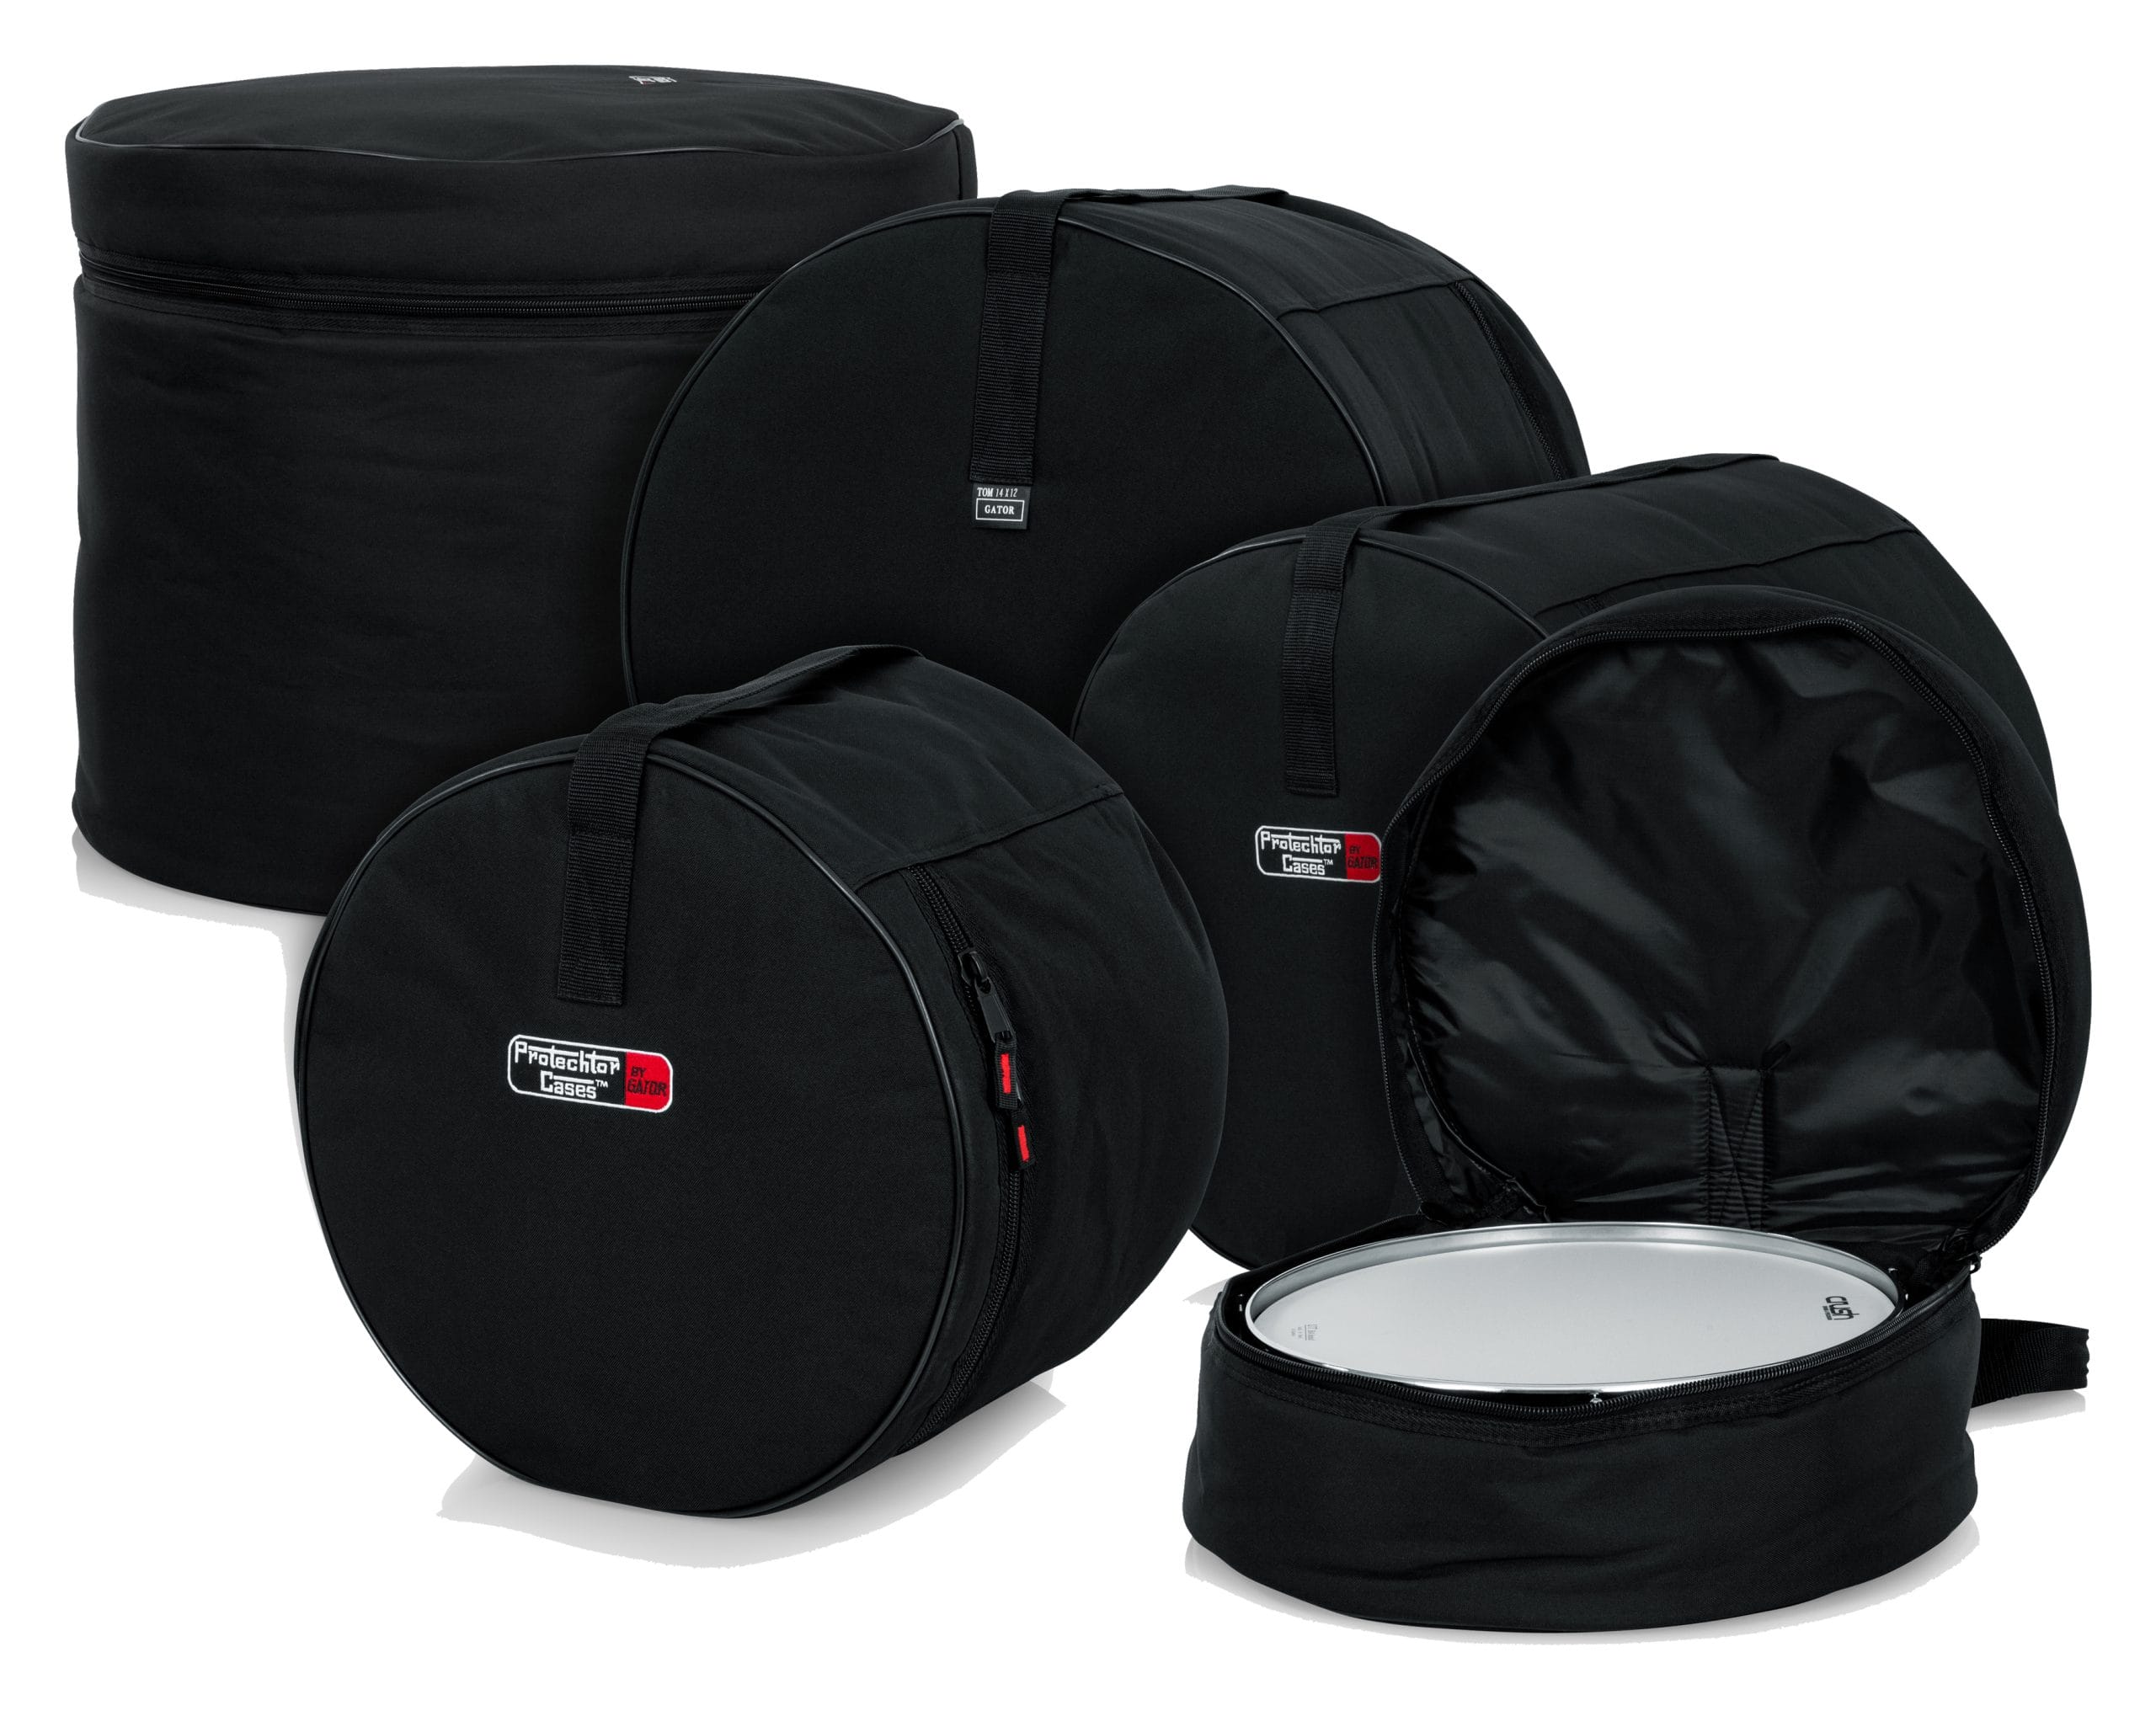 Shop Drum Gig Bags Today with GatorCo!